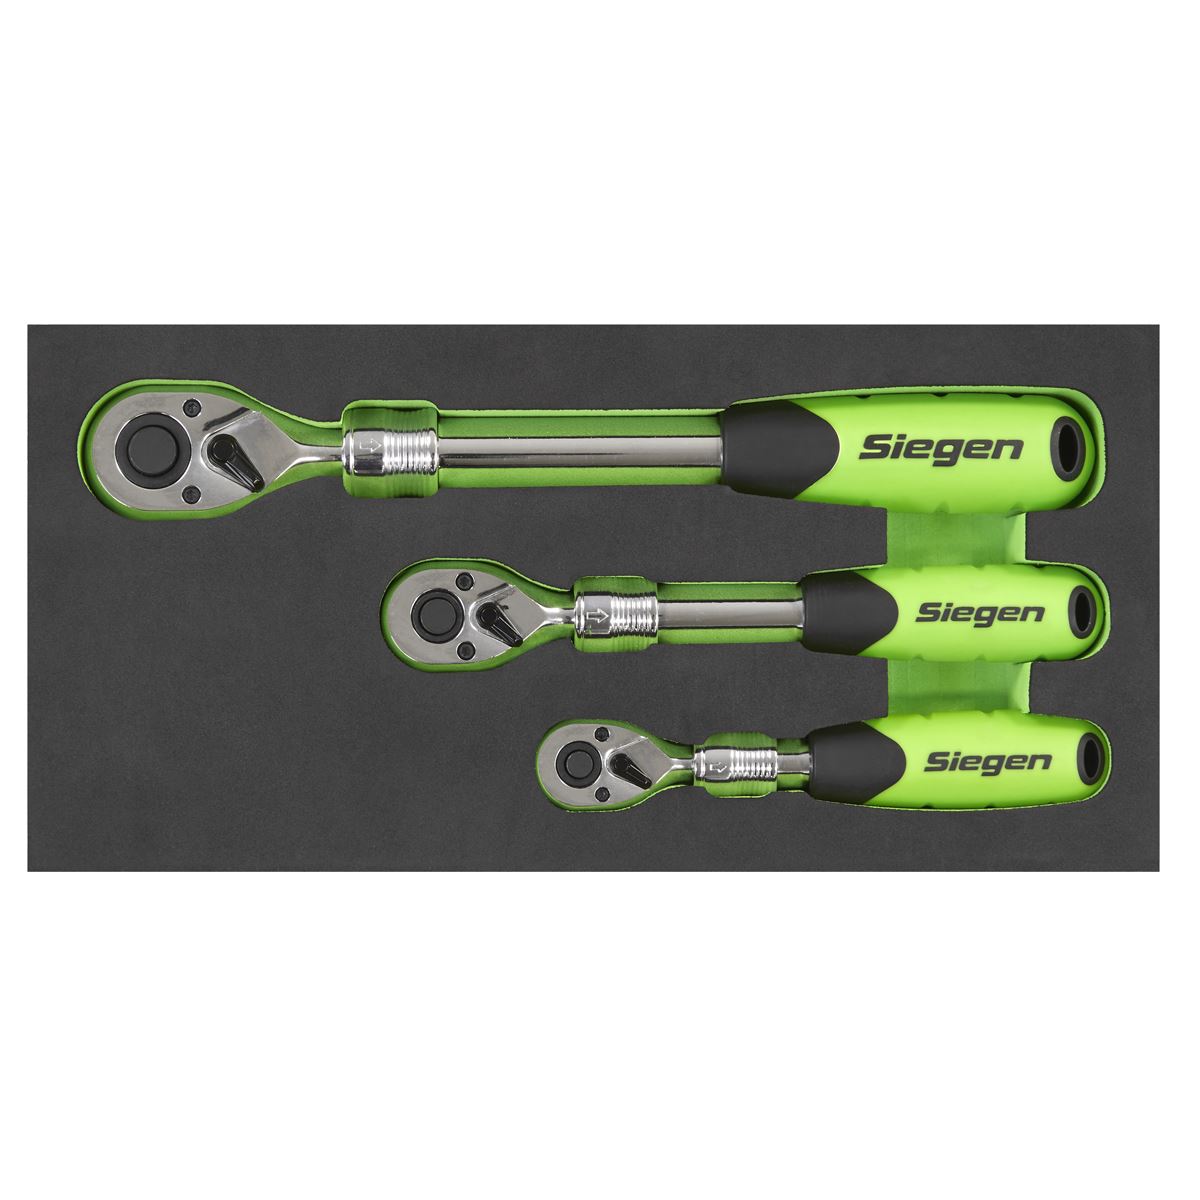 Siegen by Sealey Ratchet Wrench Extendable 3pc Set